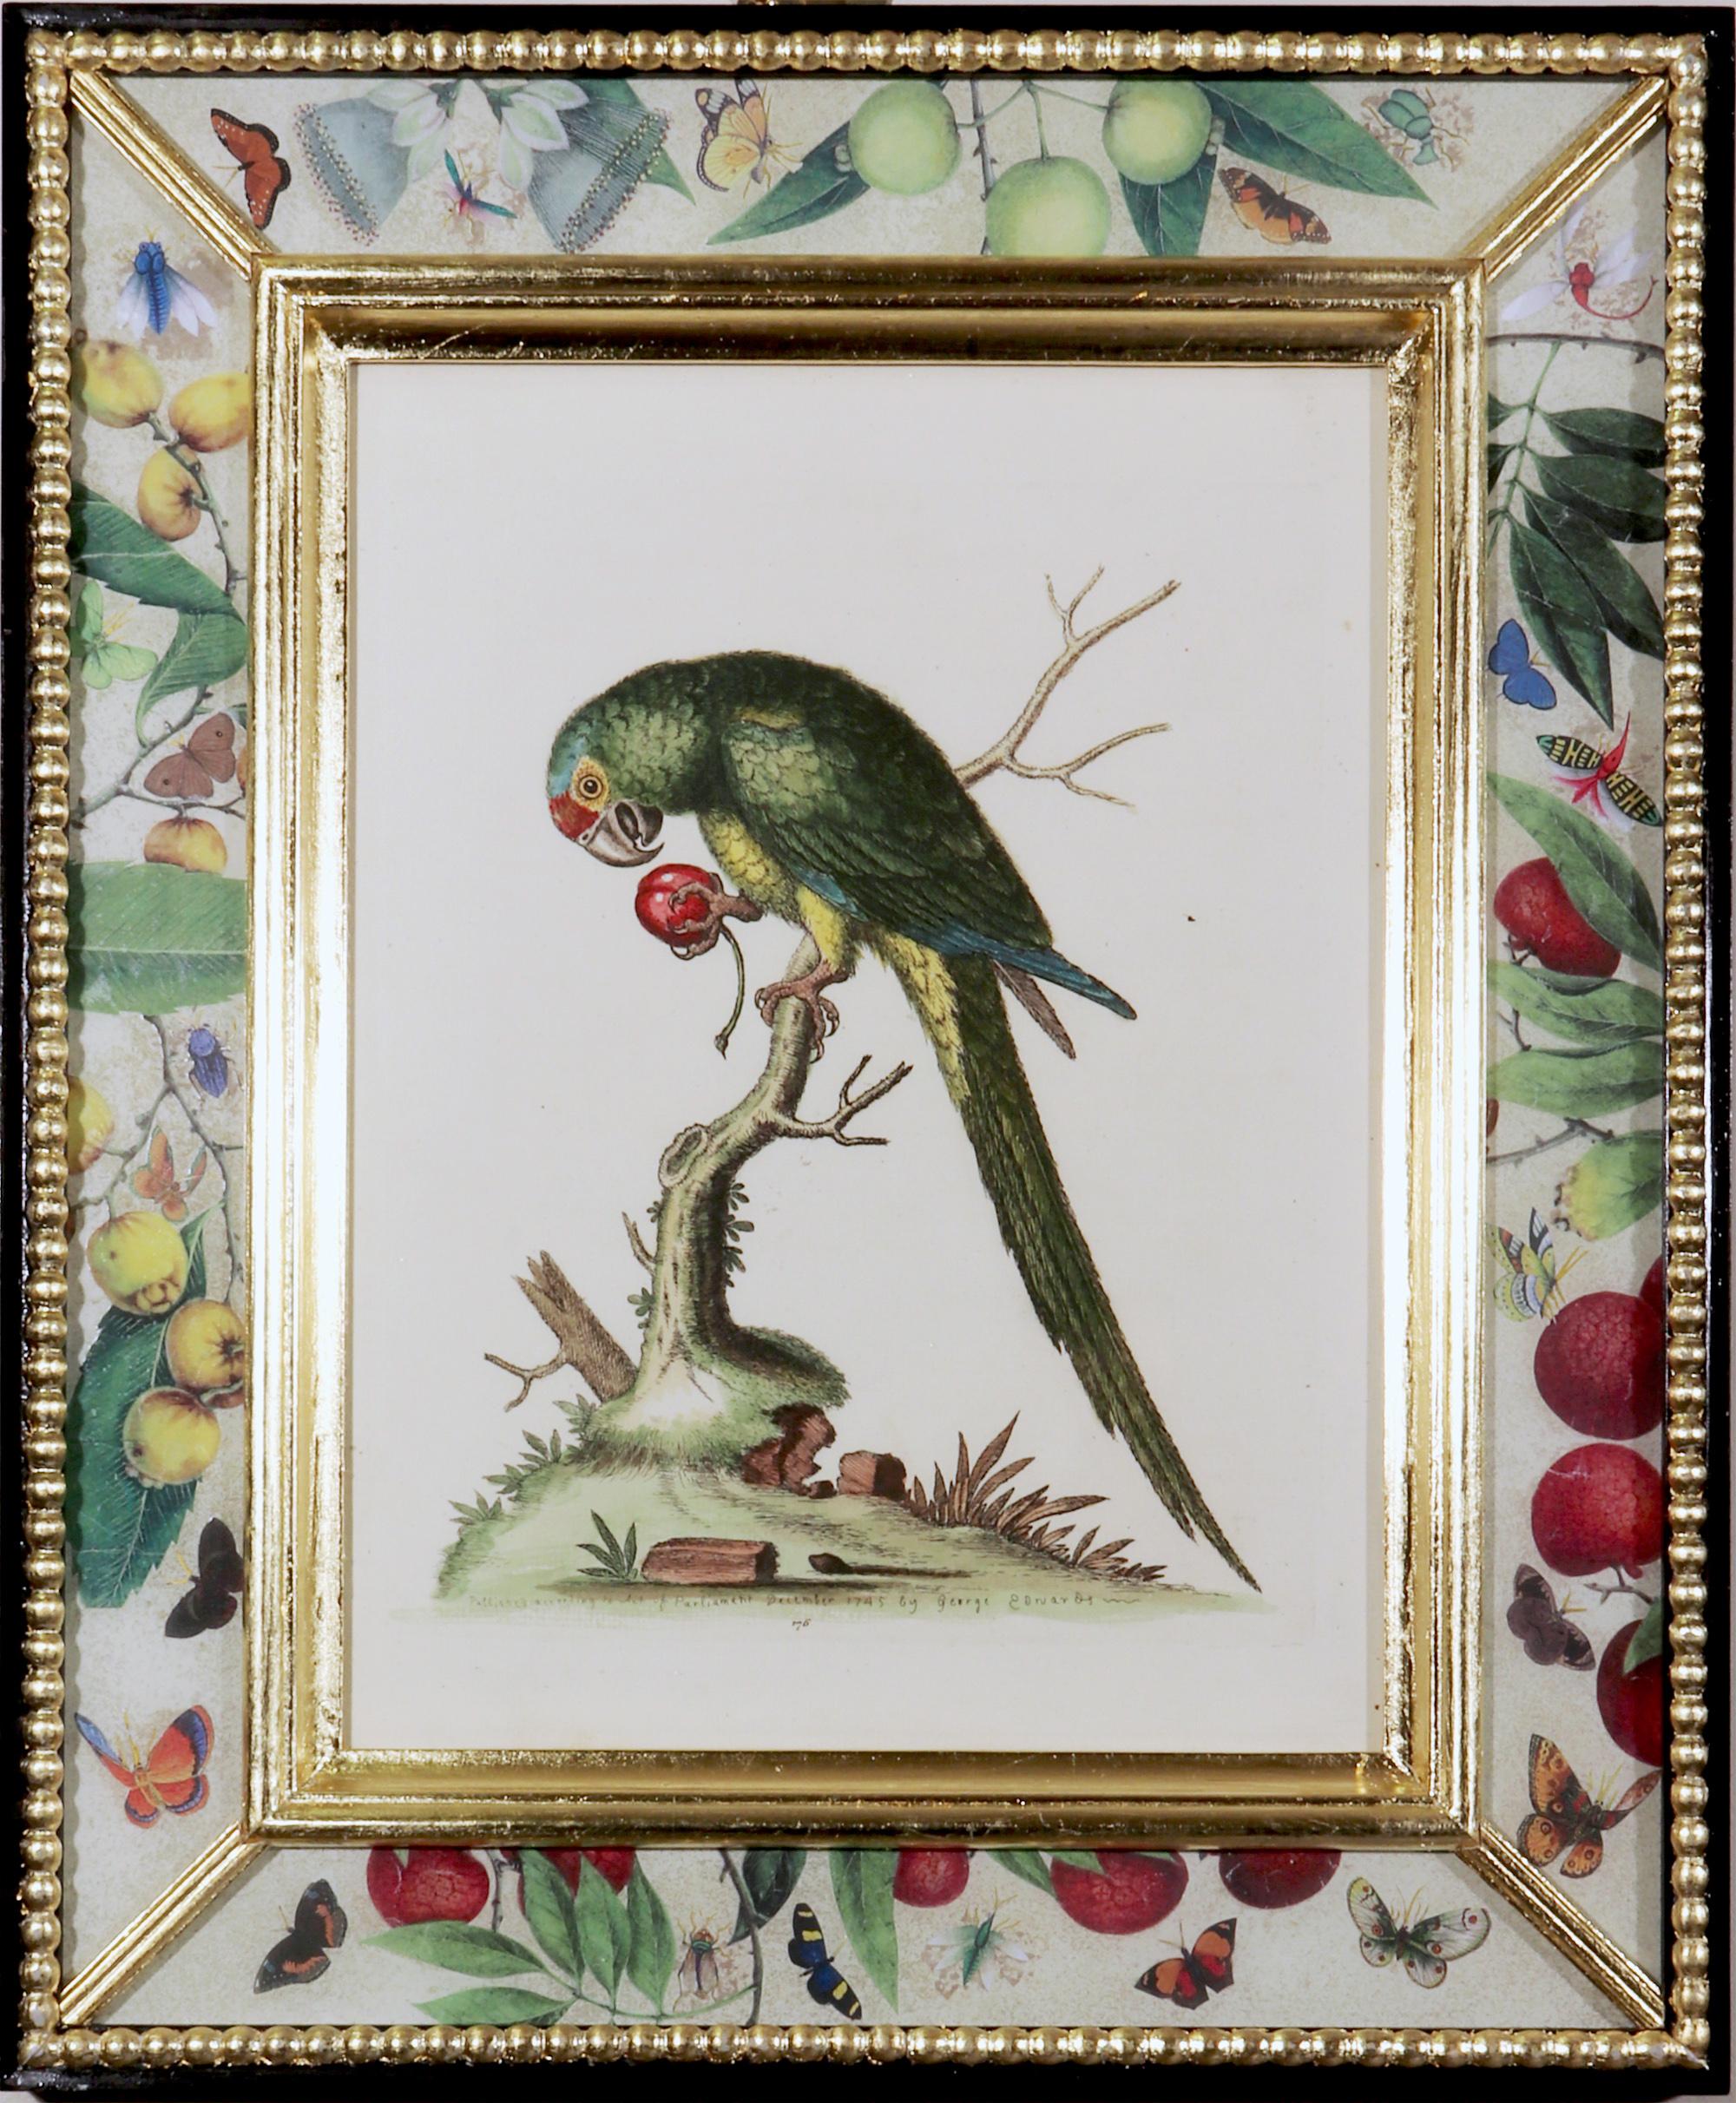 George Edwards prints of parrots with decoupage frames,
The engraver Georg Dionysius Ehret,
Set of six,
circa 1745-1750

The George Edwards engravings of six different parrots are mounted in decoupage frames.

Dimensions: 16 1/4 inches x 13